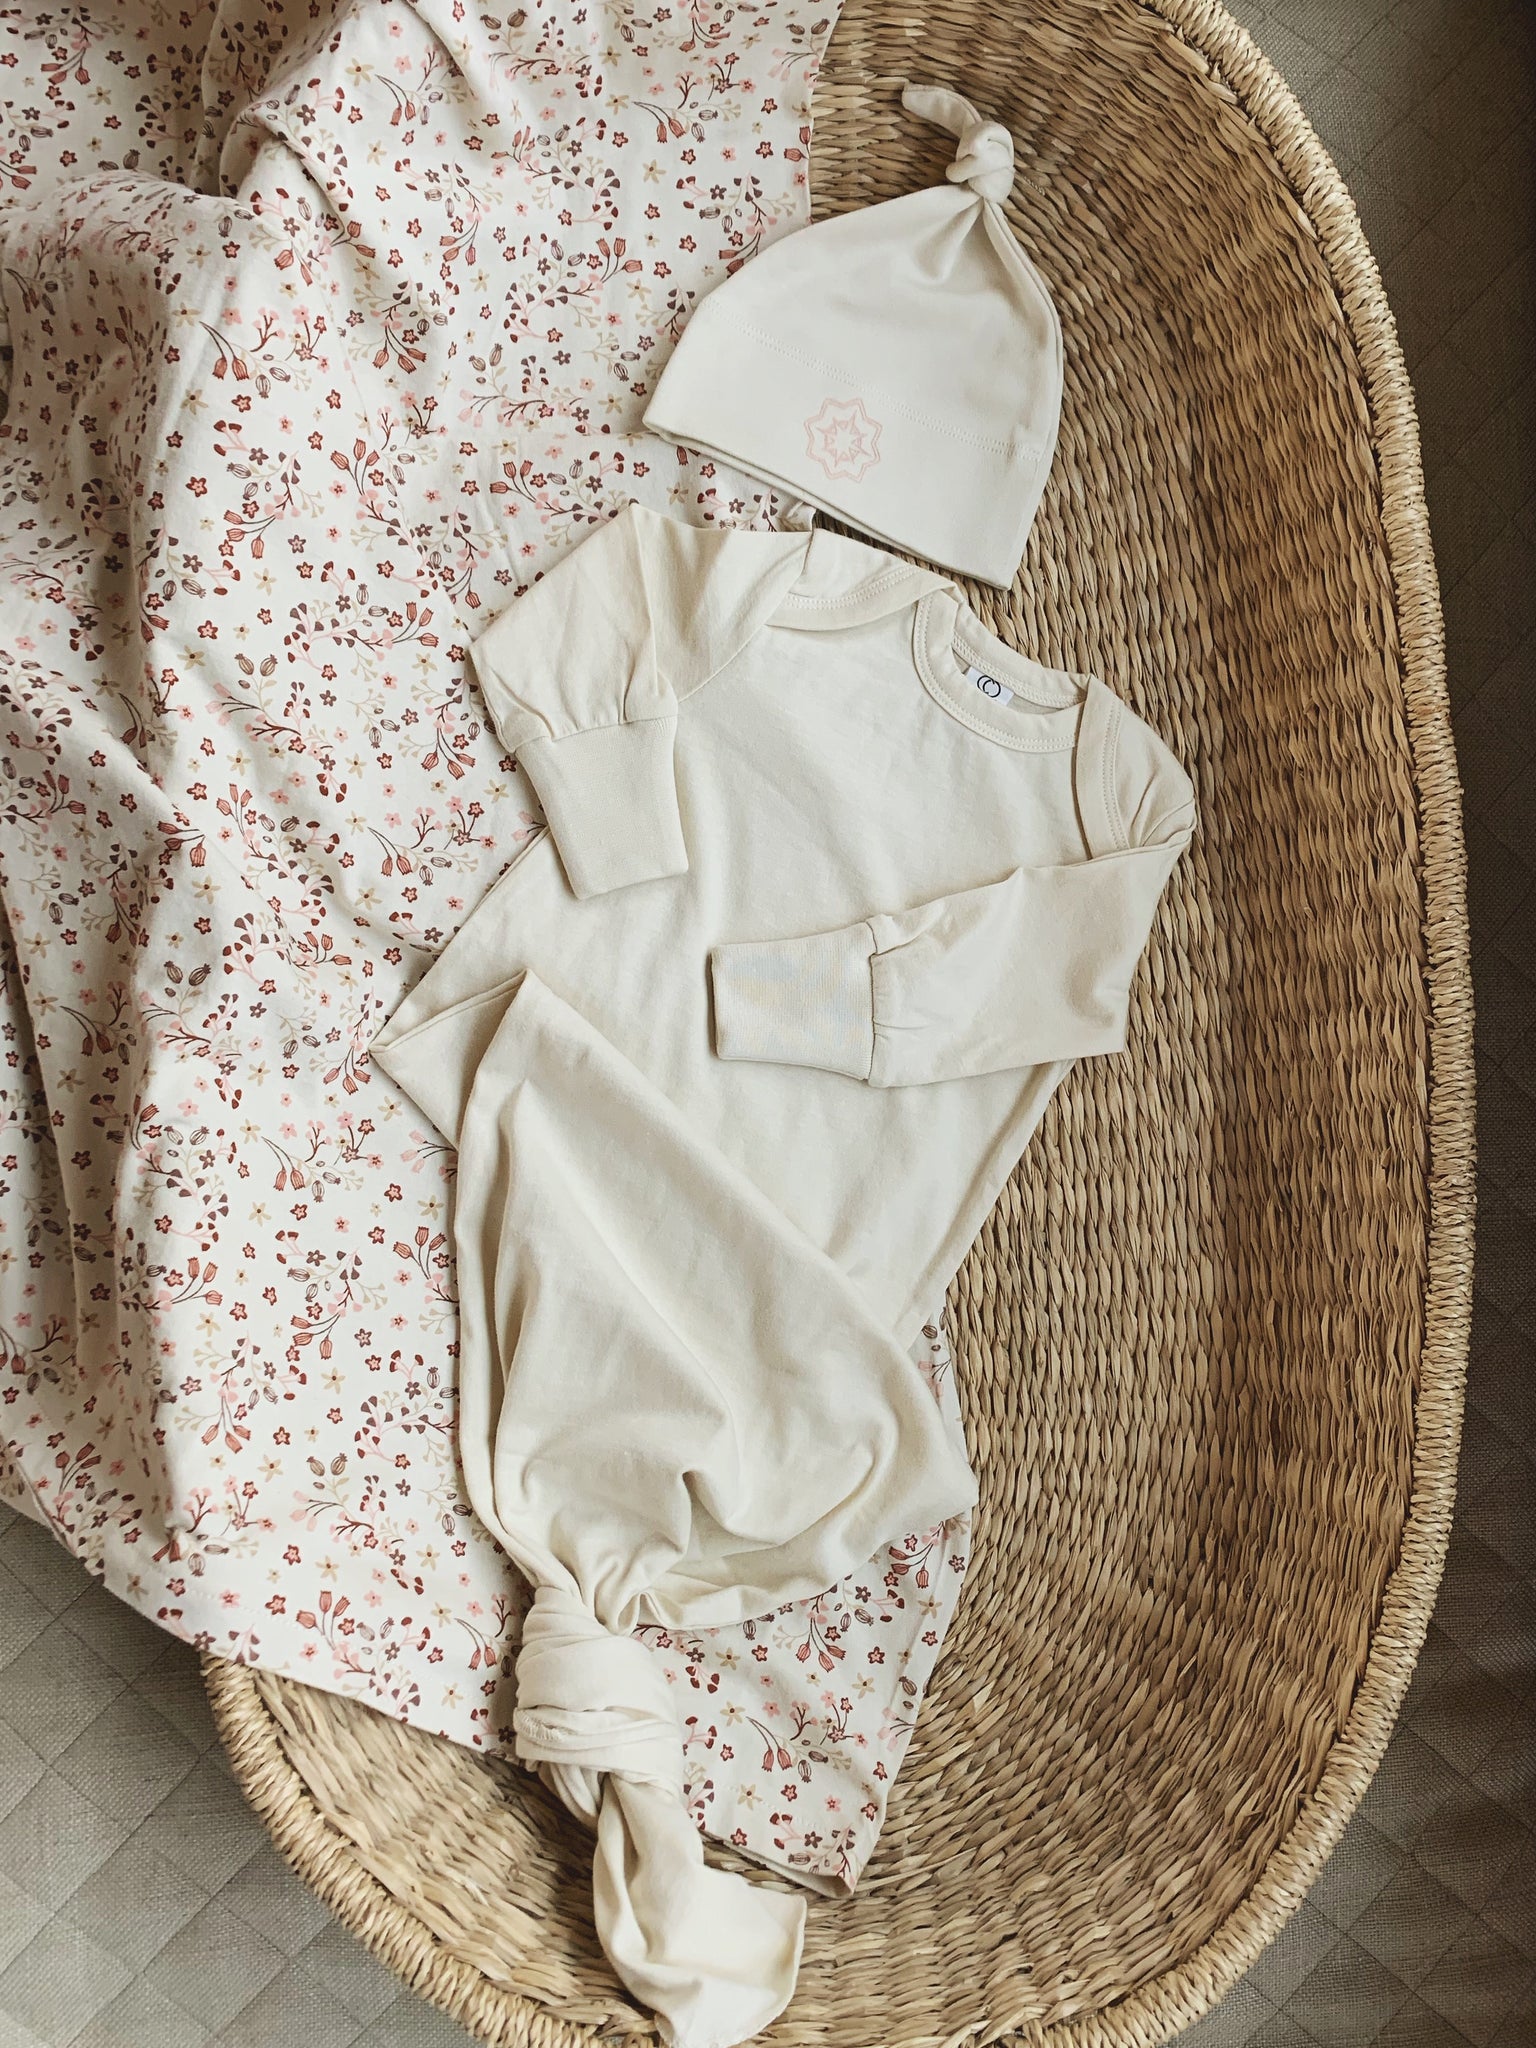 Organic Sleeper, Hat, and Swaddle Set in Cream & Floral ONE LEFT!